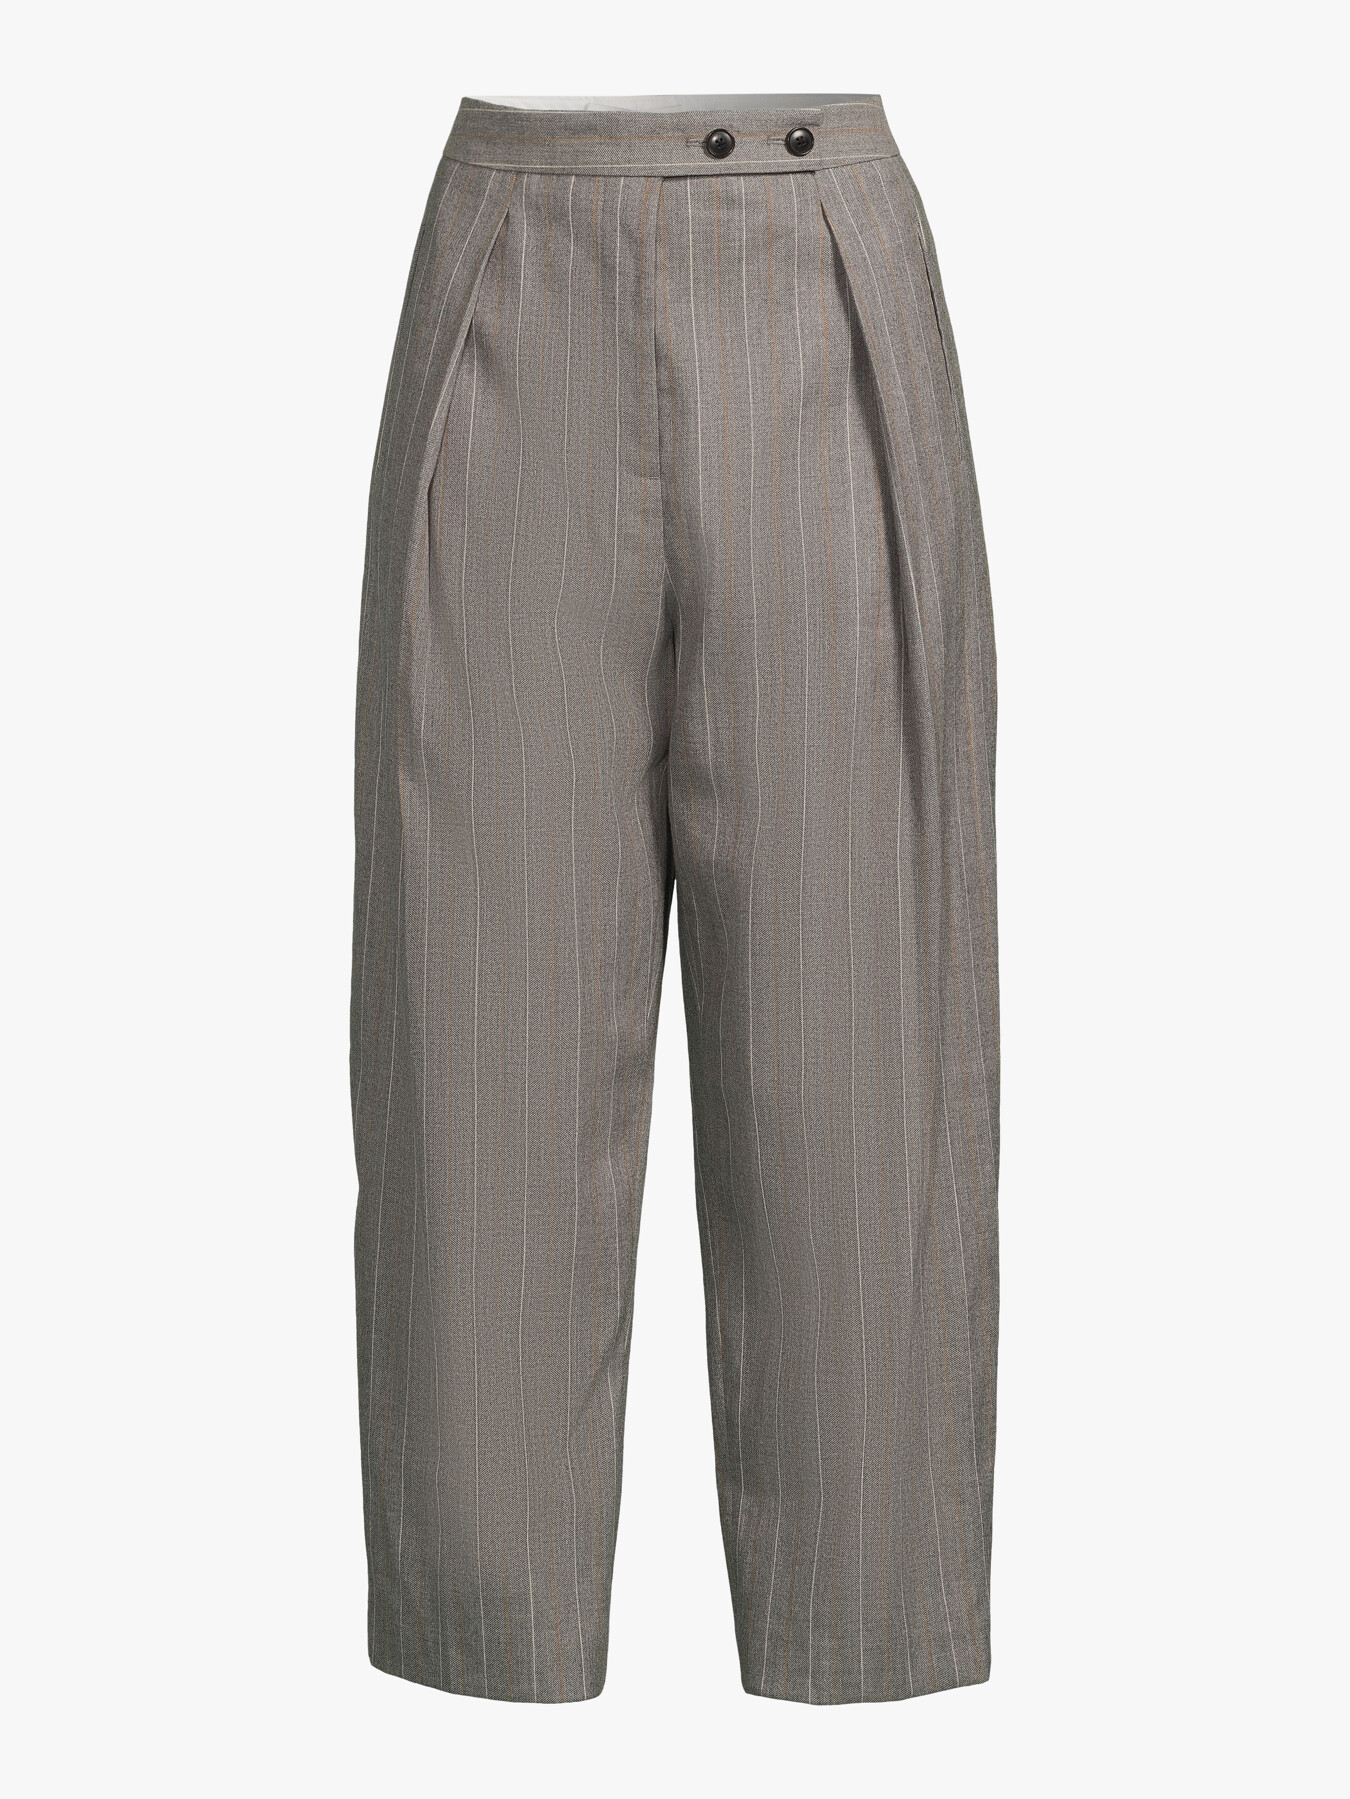 3.1 PHILLIP LIM / フィリップ リム HIGH WAISTED TAPERED TROUSER GREY